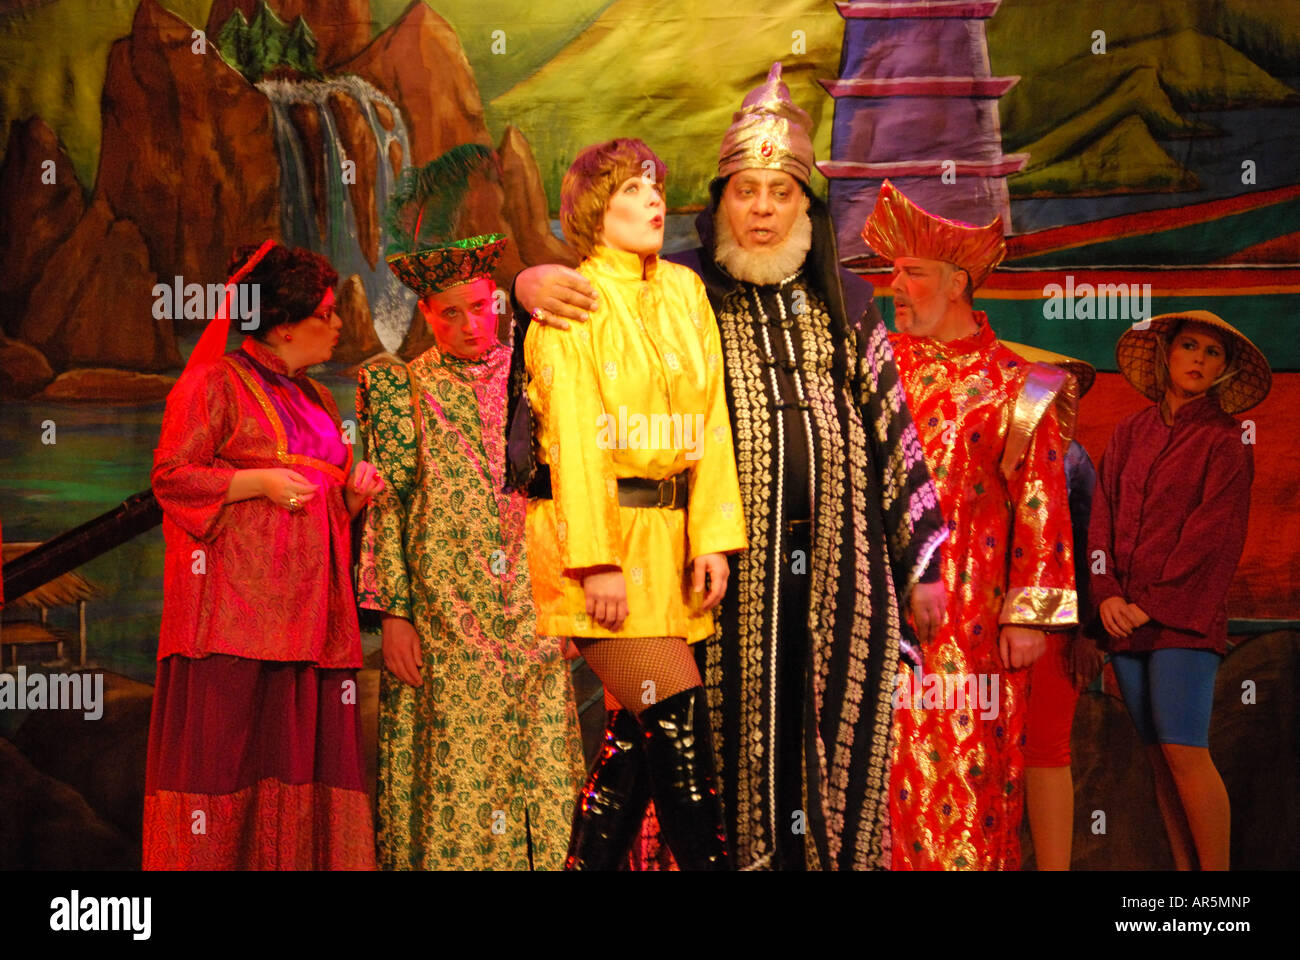 'Aladdin' Pantomime play, Club Concorde, Middlesex, England, United Kingdom Banque D'Images